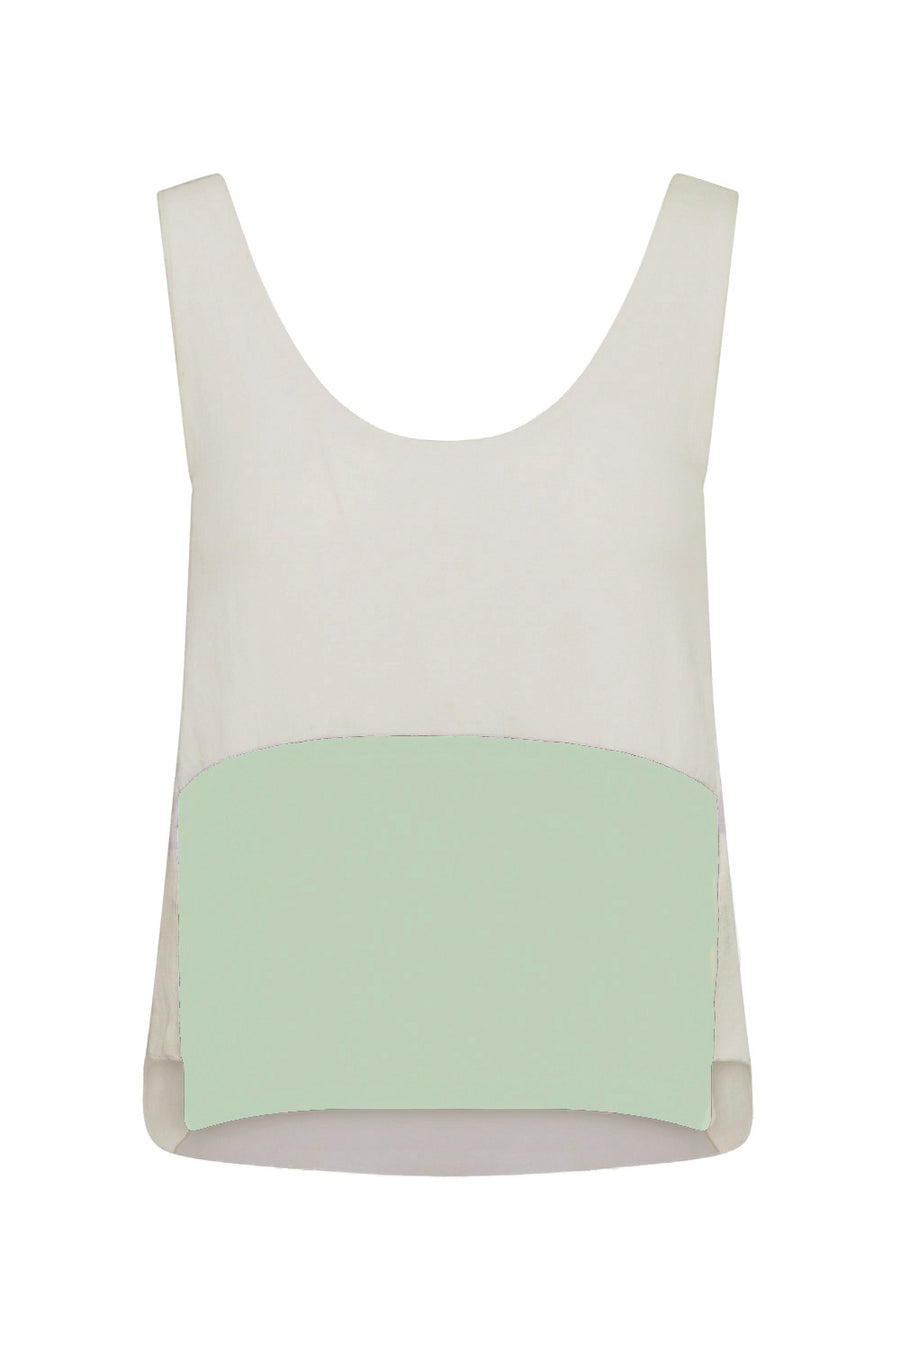 Joelle Tank Top Upcycled